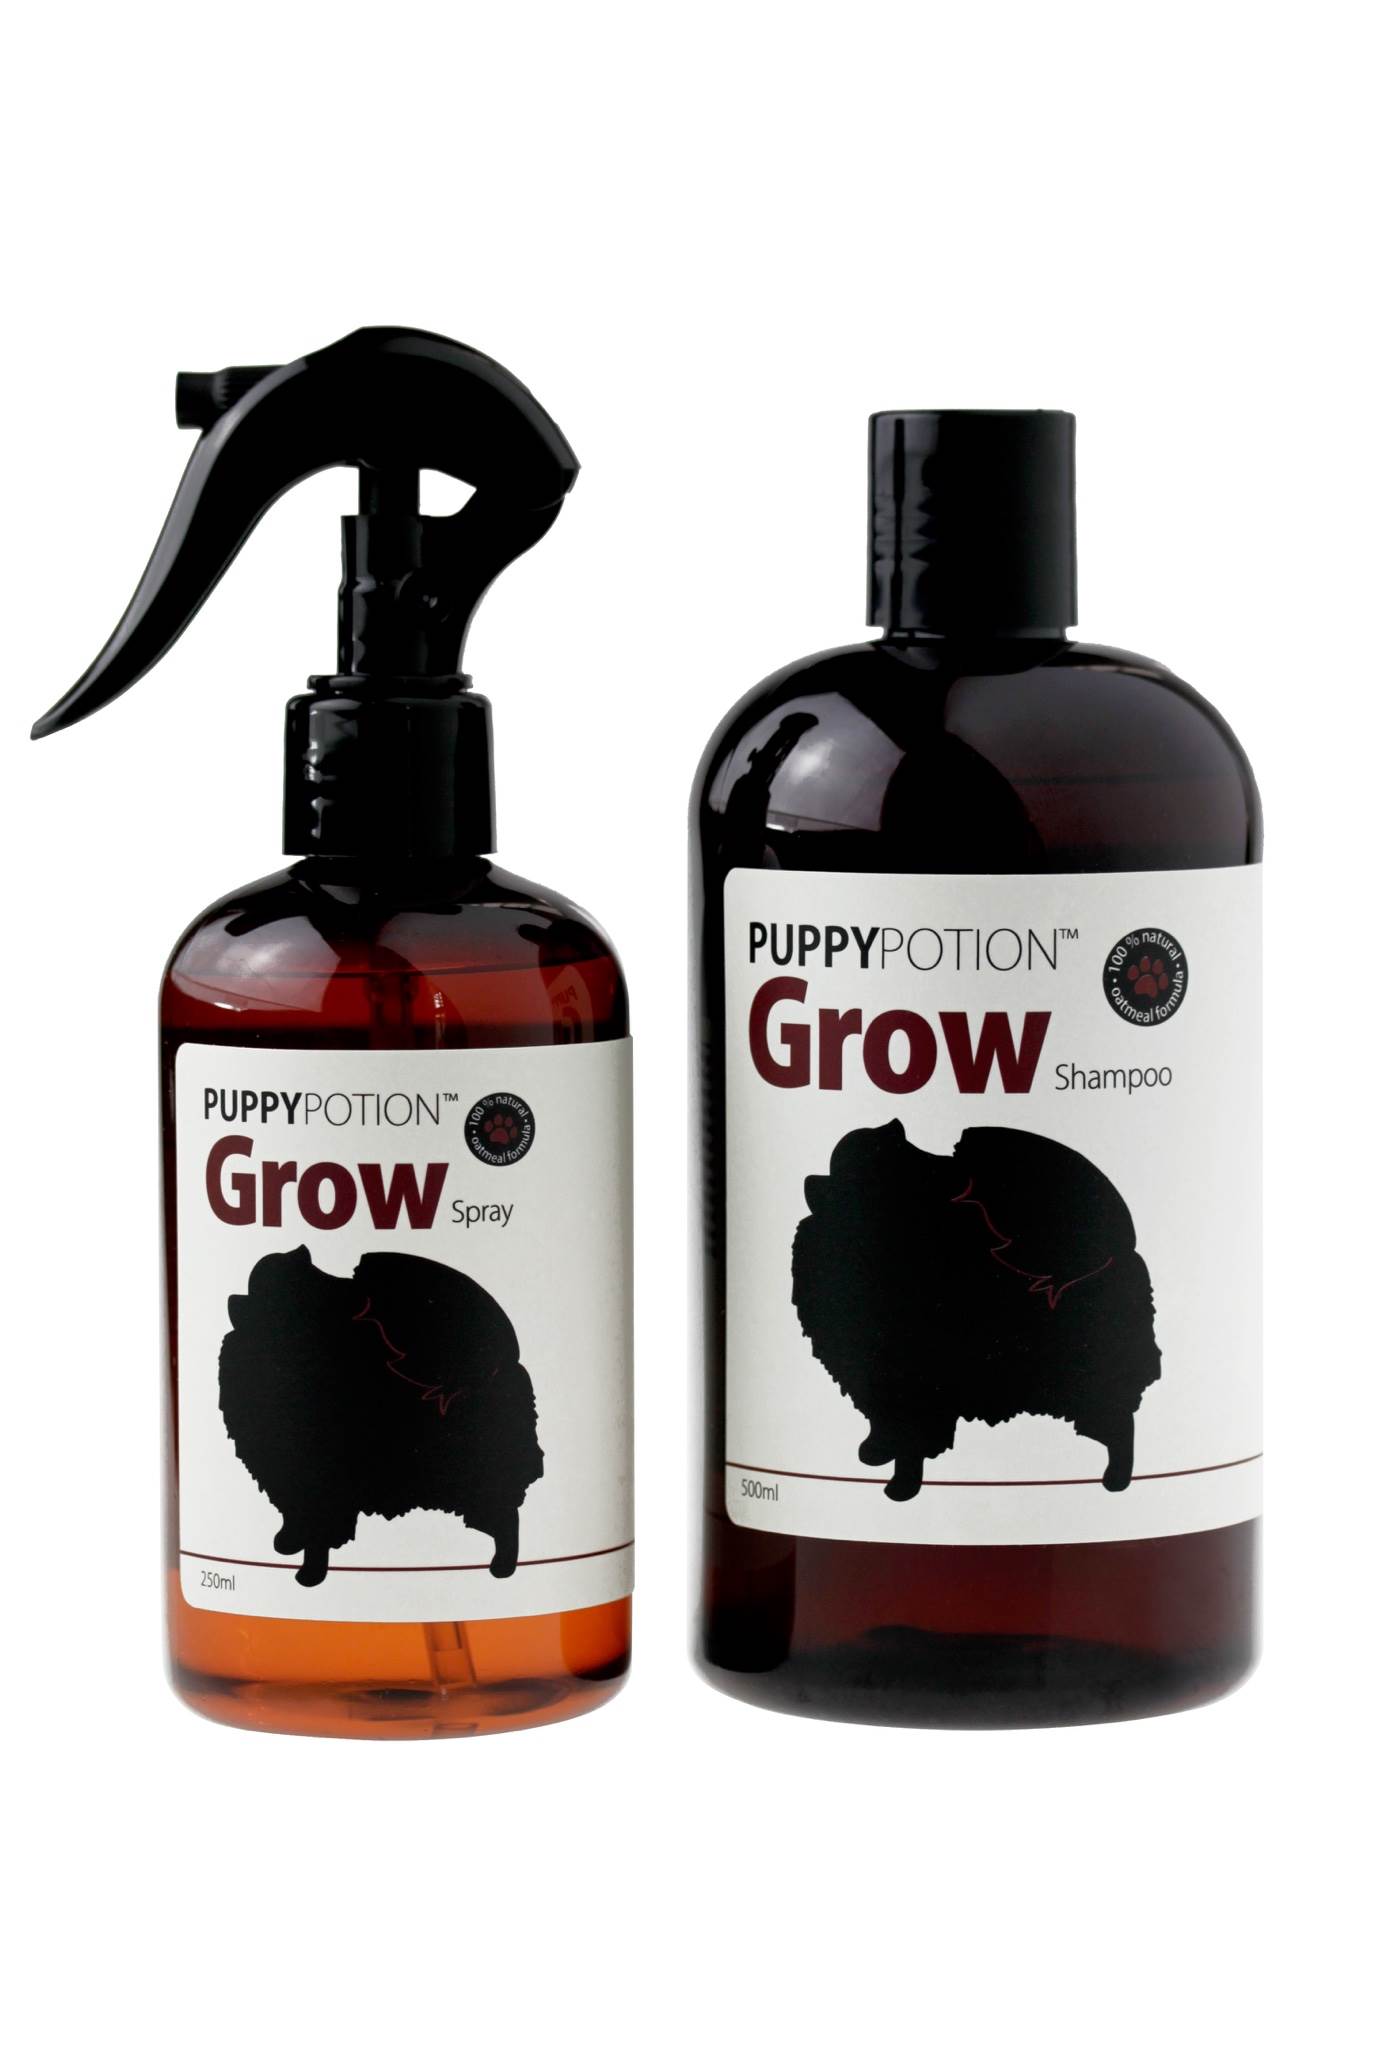 Set! Puppy Potion Grow Shampoo + Spray Condition for dogs, ginseng extract  reduce hair loss